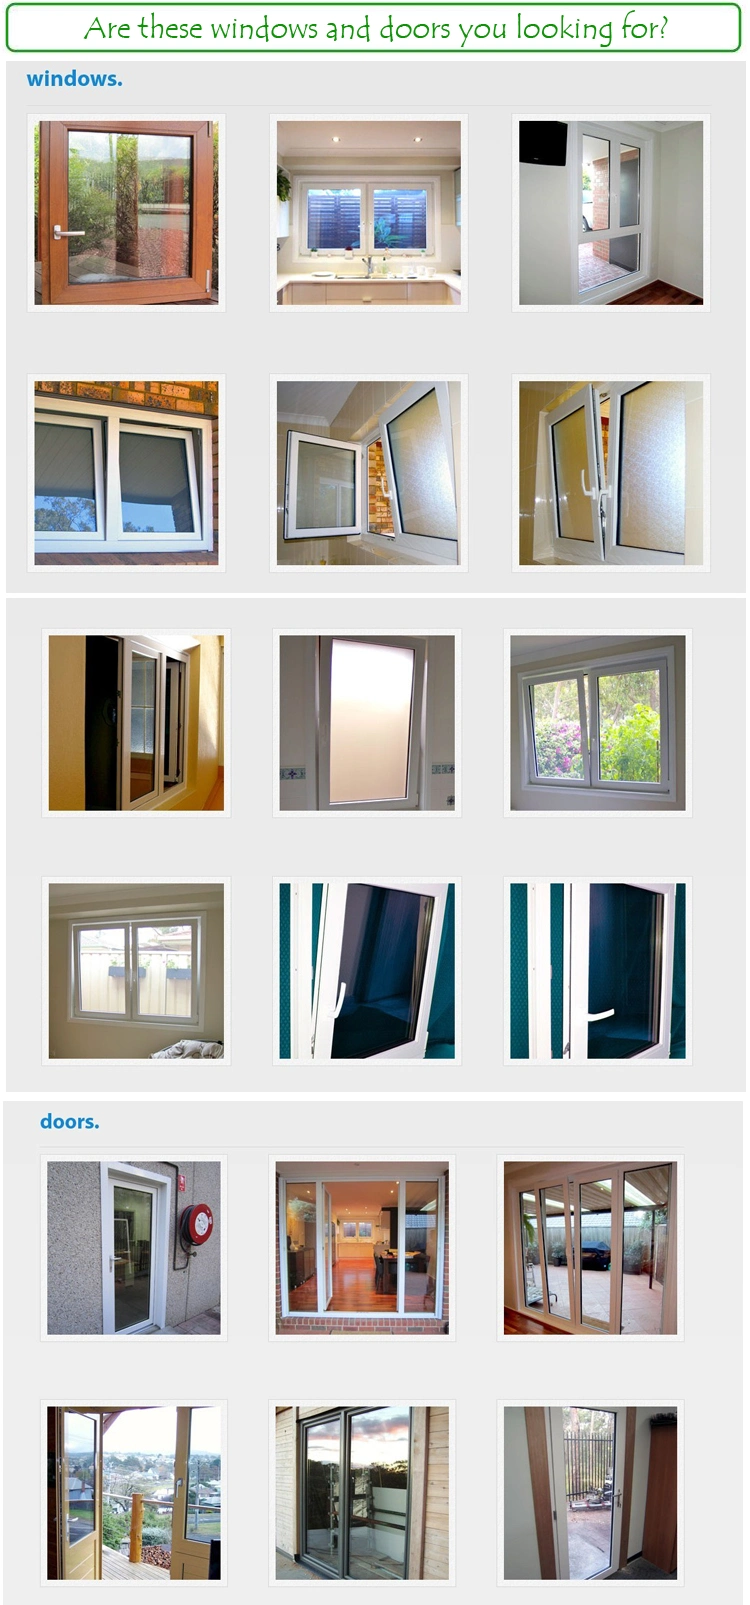 Grey Color Powder Coating Thermally Broken Aluminum Windows with Security Screen